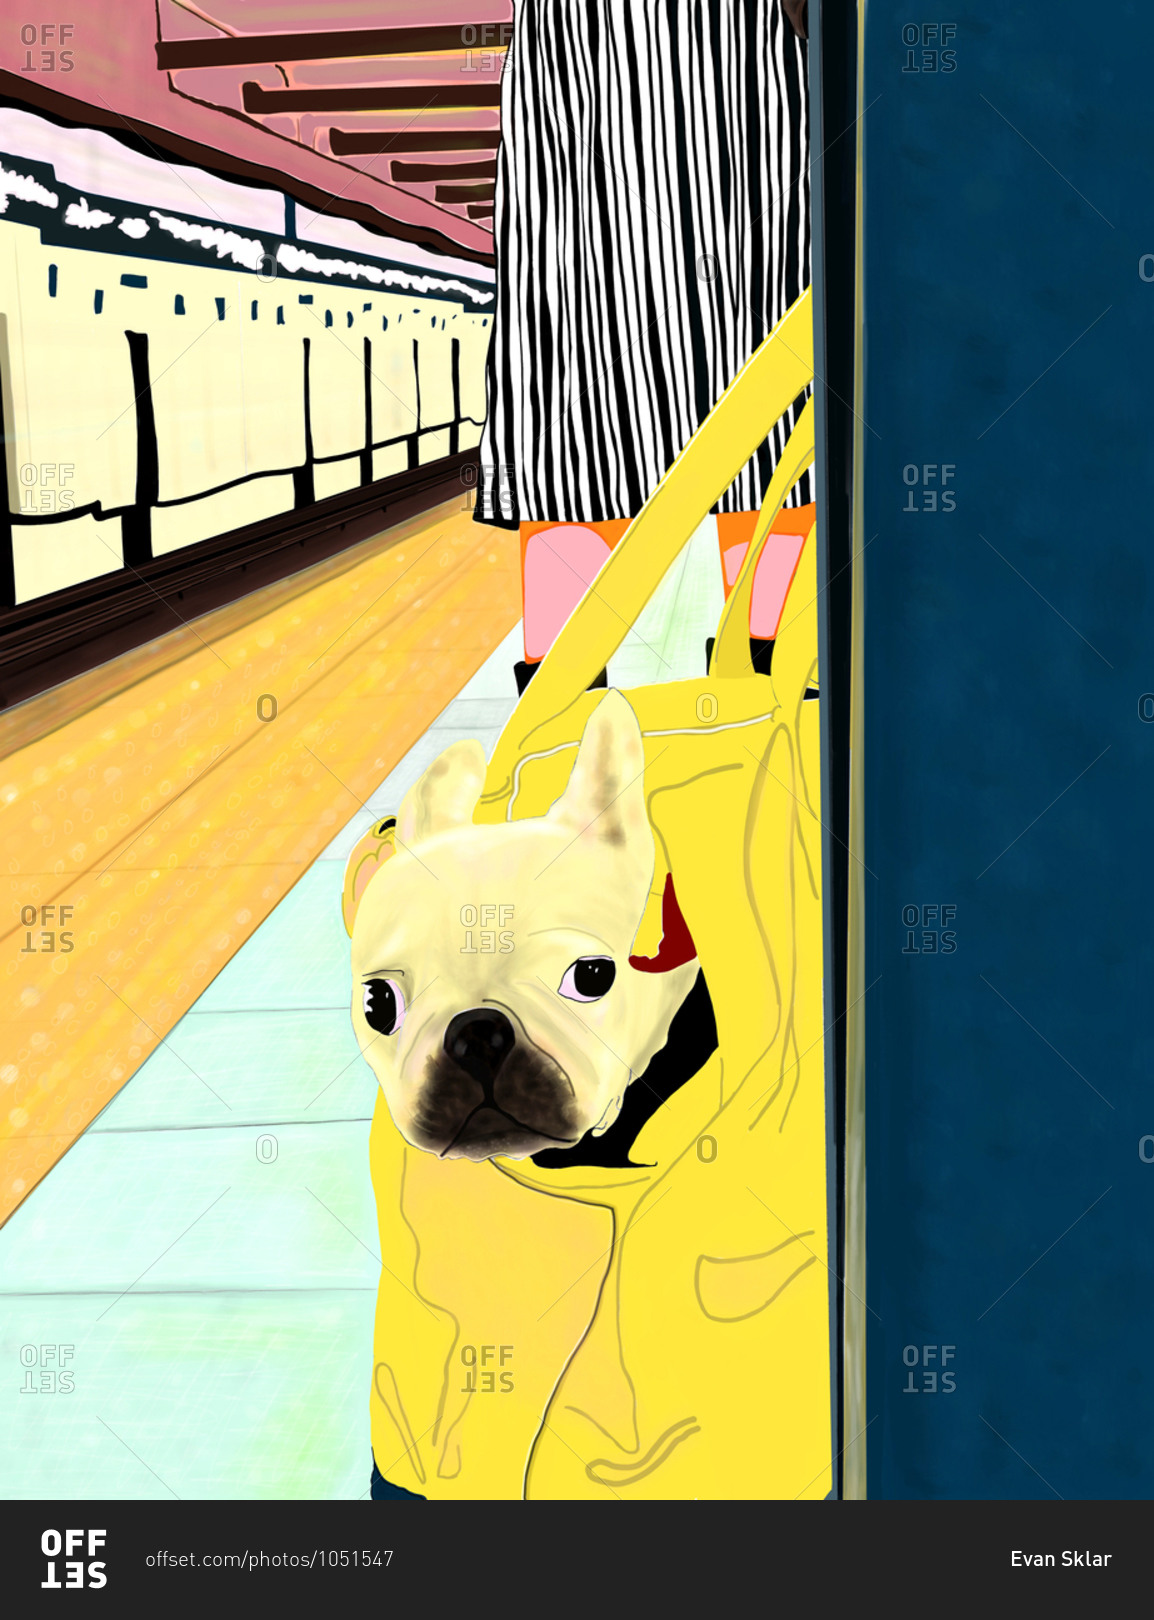 A woman waiting in a subway platform with her dog in a yellow bag